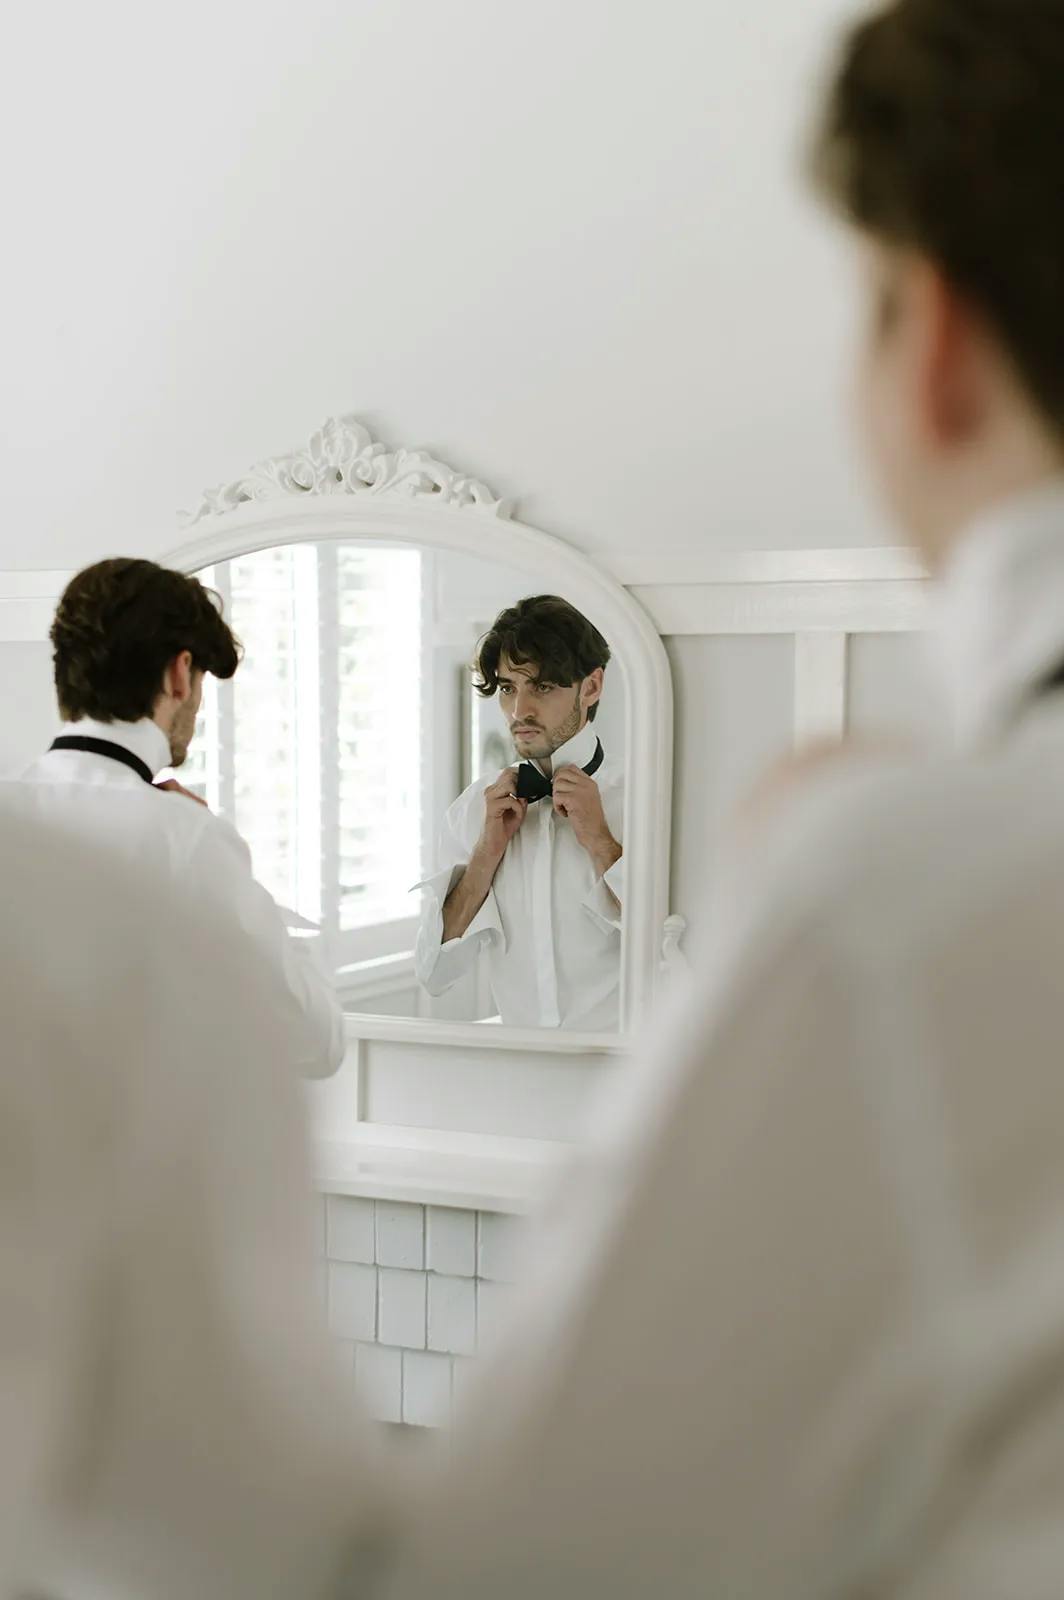 A man in formal attire adjusts his bow tie while looking in a white-framed mirror. The reflection shows his focused expression. The background features white walls and a window with blinds, creating a bright and elegant setting.